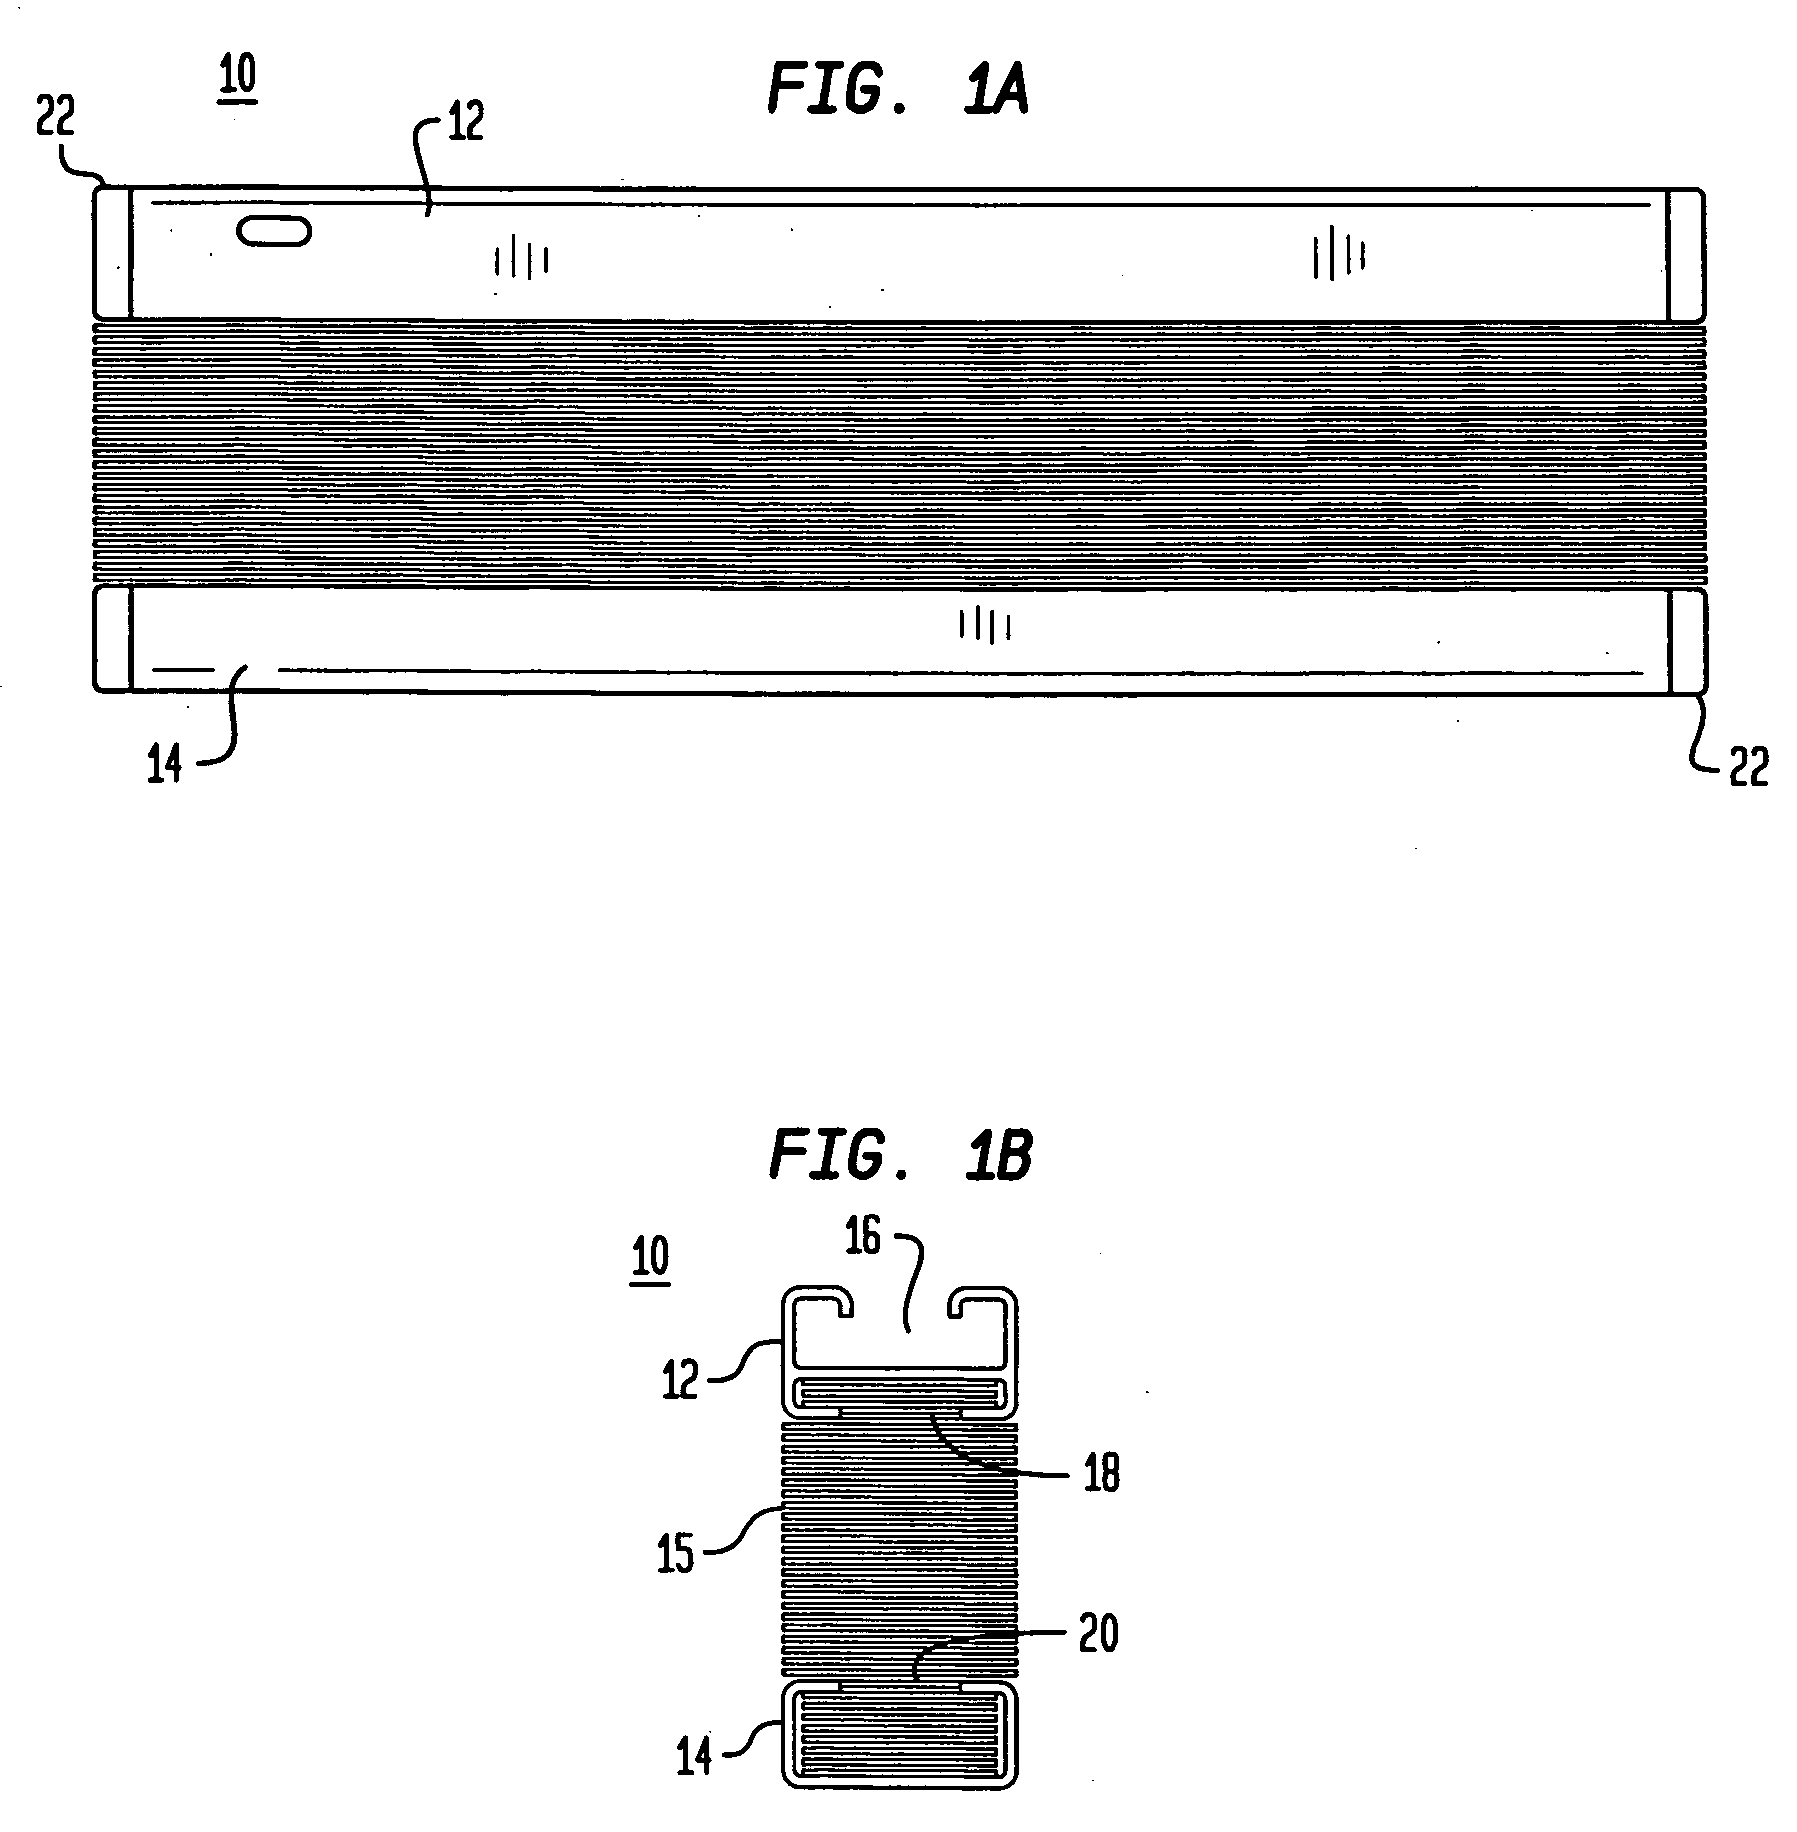 Window covering cutting apparatus and methods